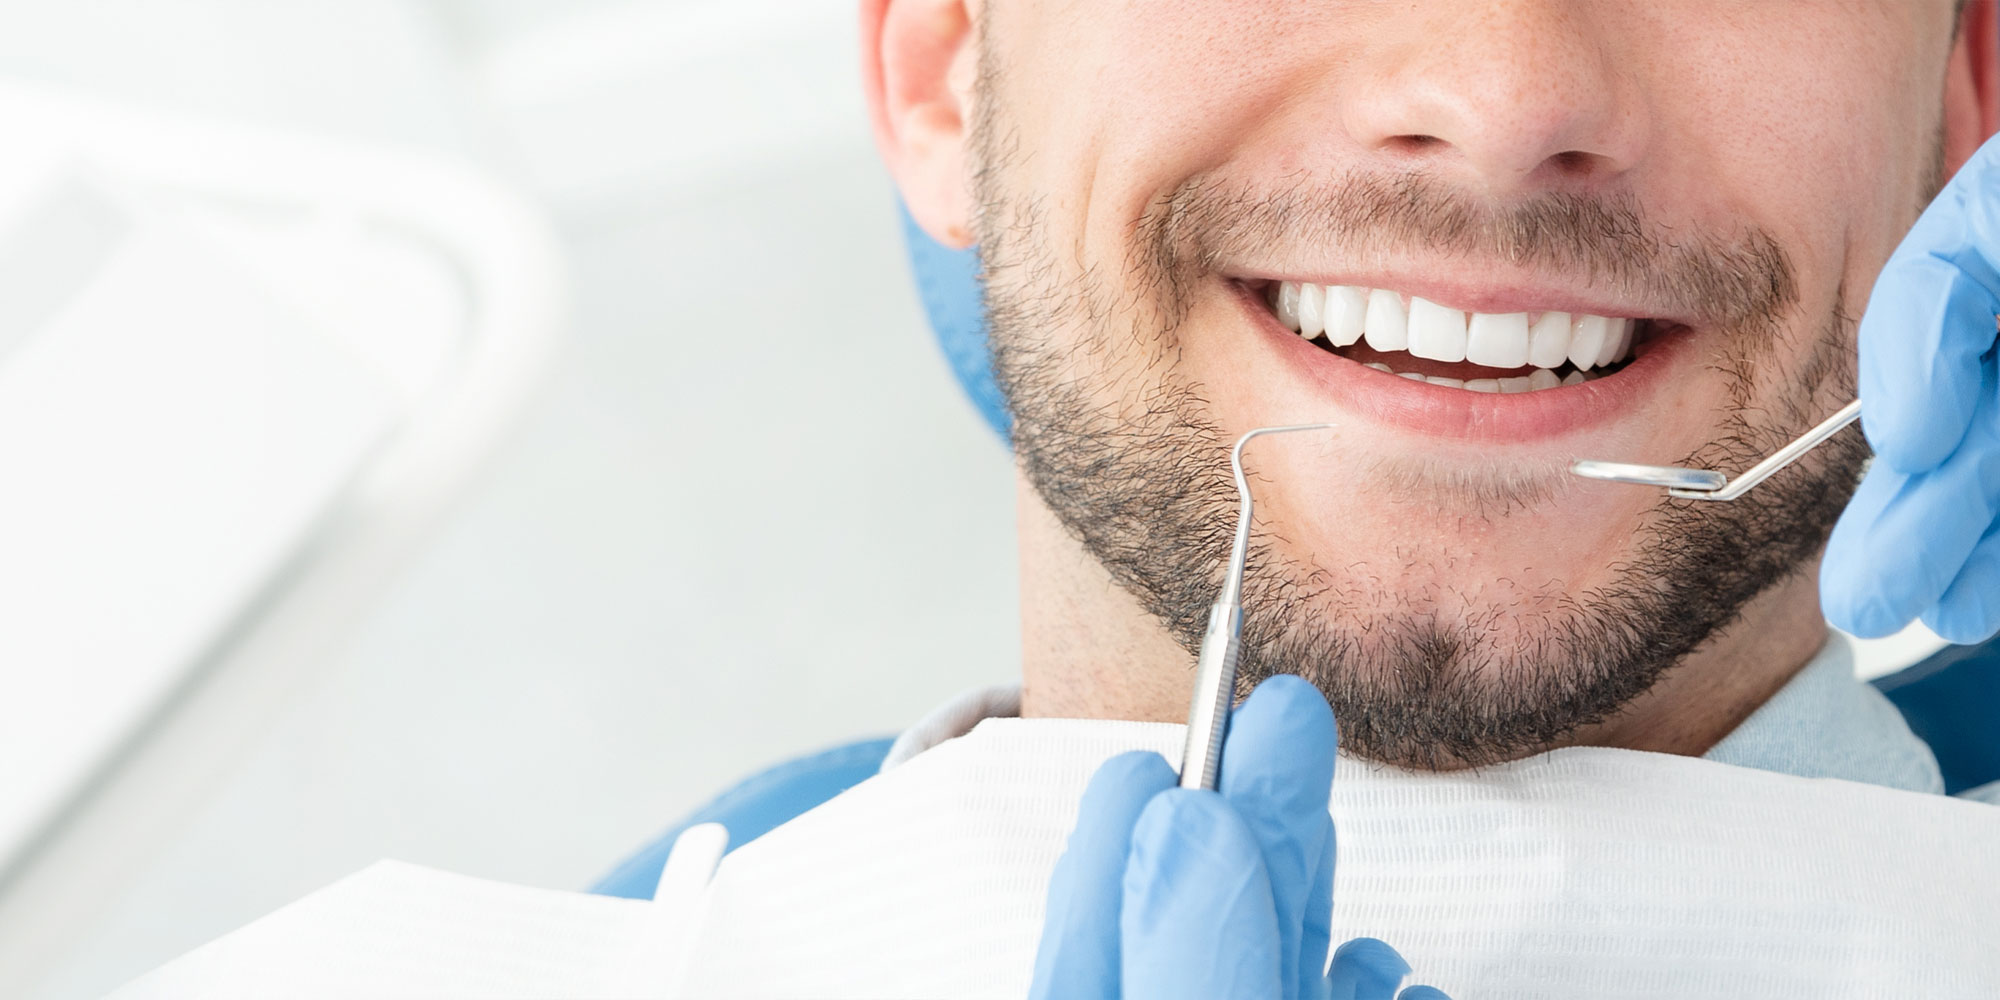 Find The Best Dental Services In Indianapolis IN Area